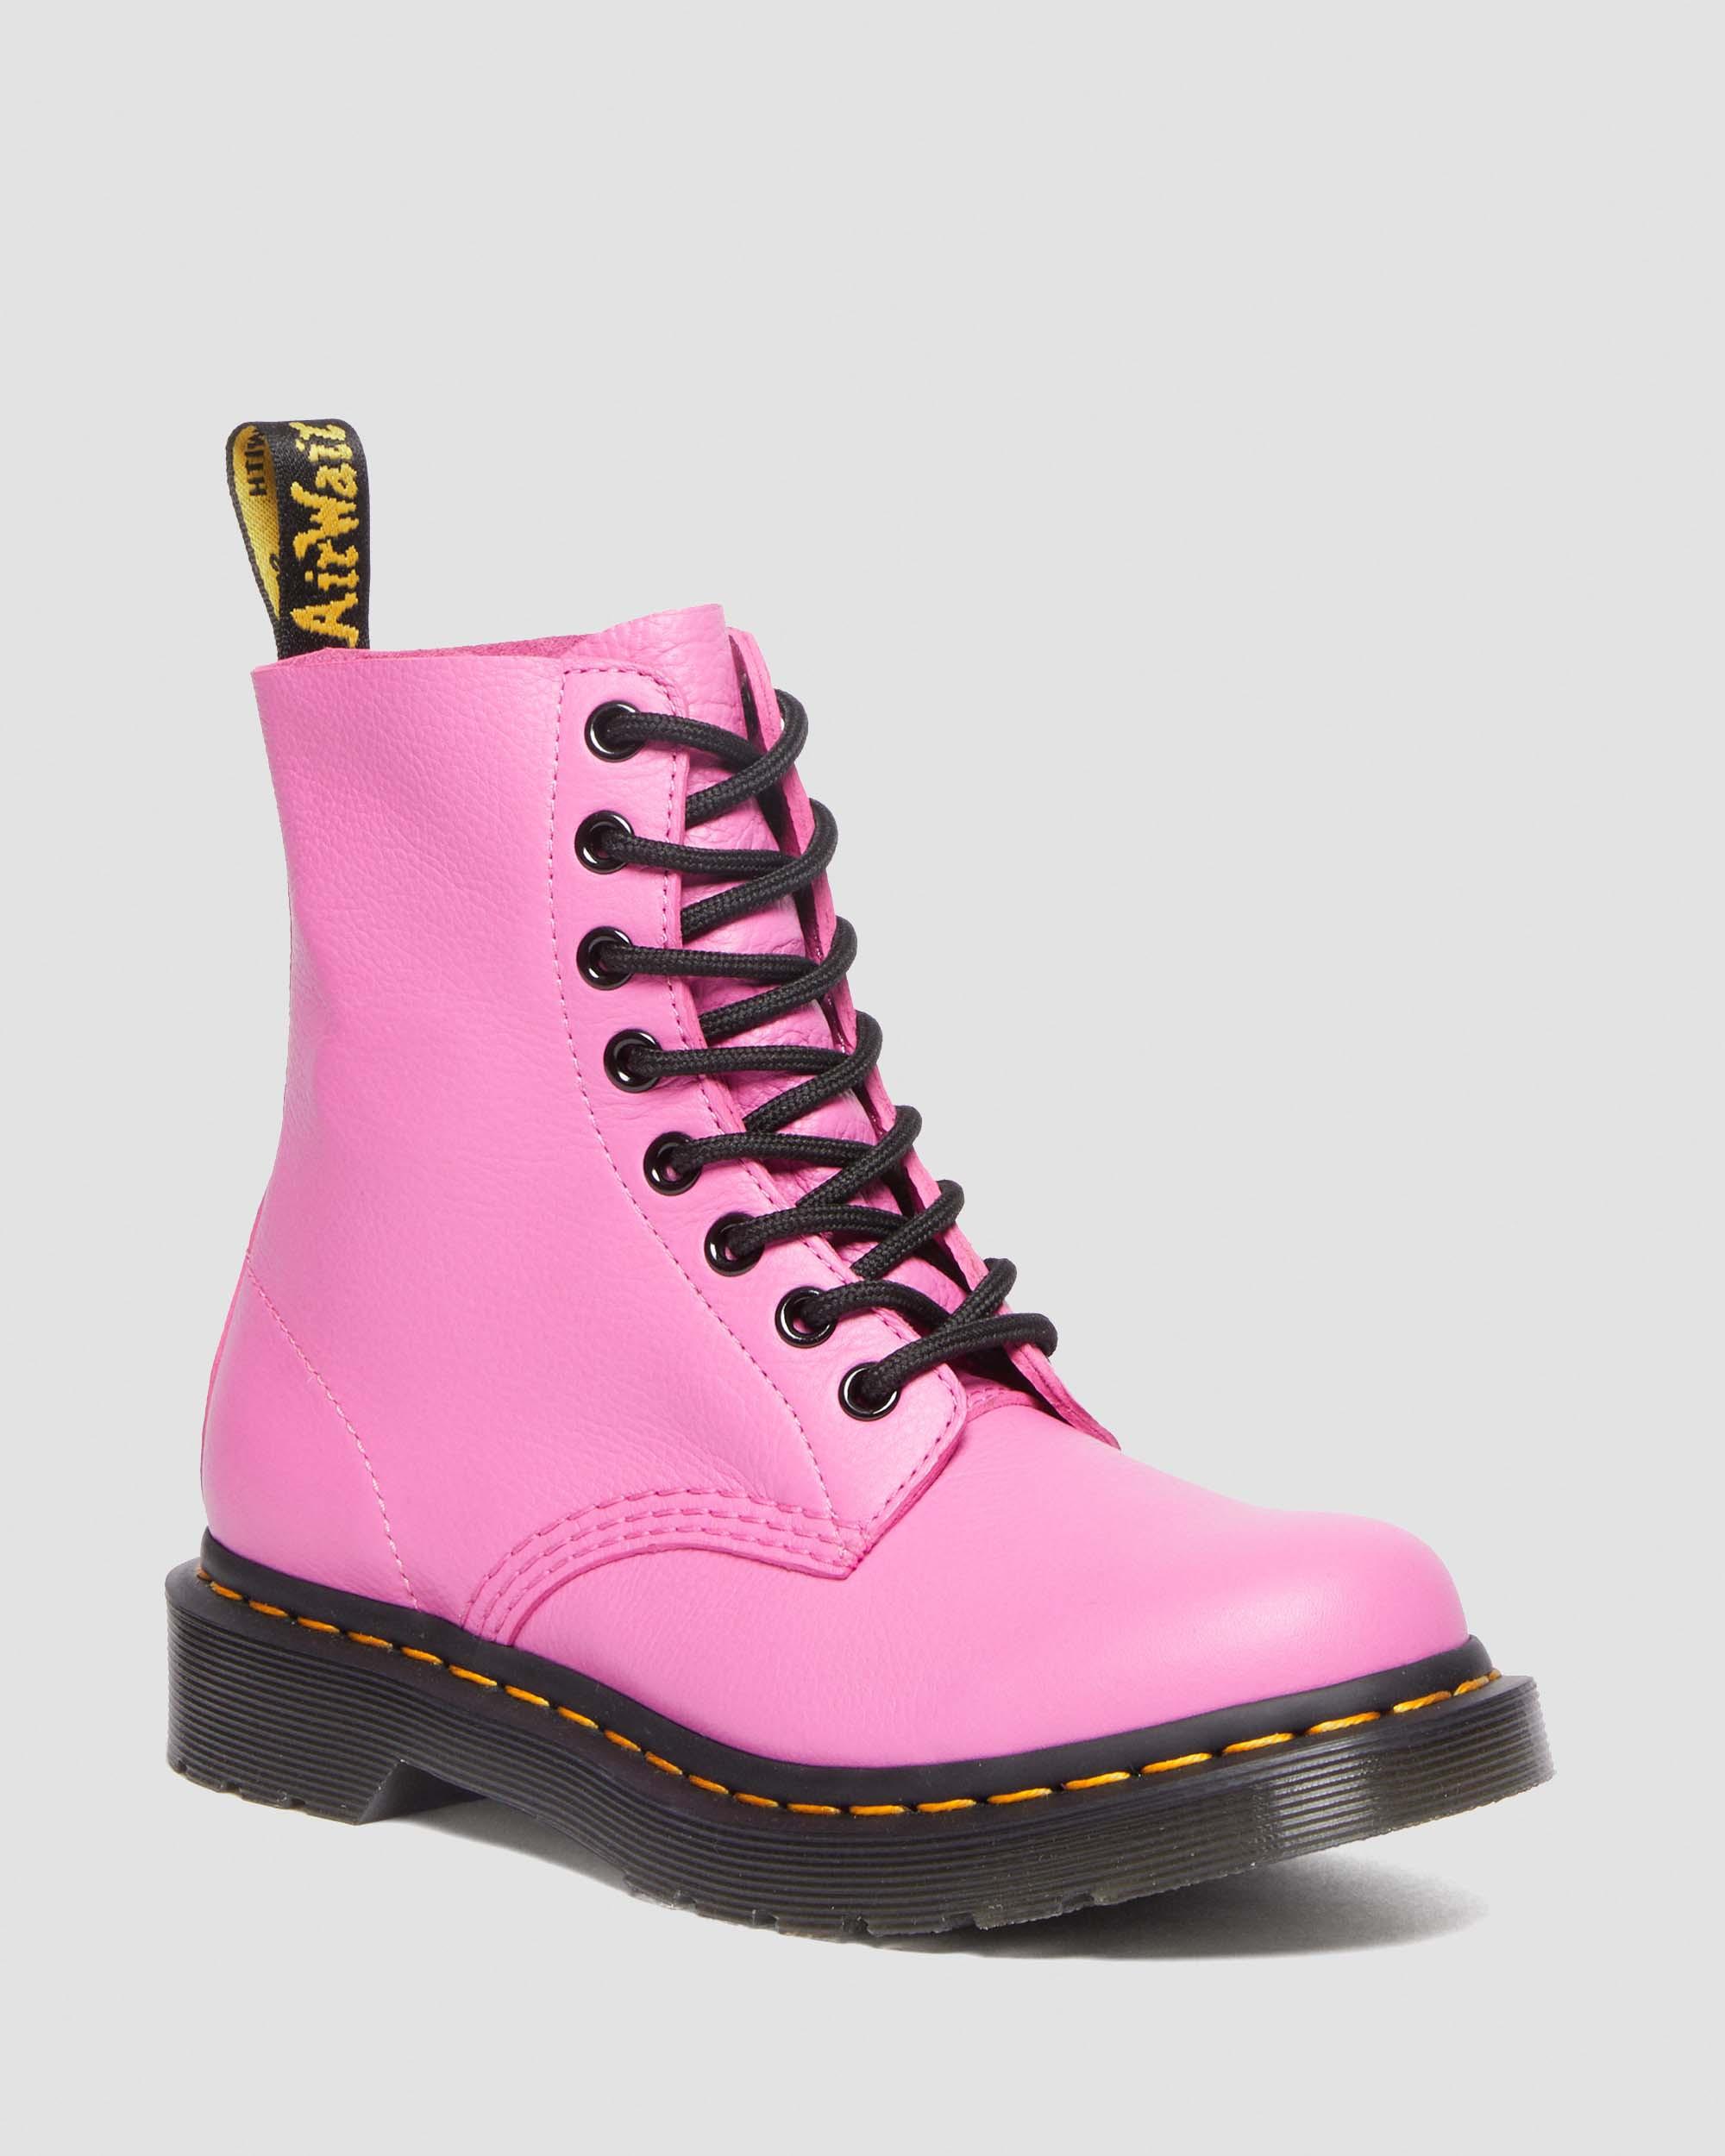 1460 Women's Pascal Virginia Leather Boots in Thrift Pink | Dr. Martens